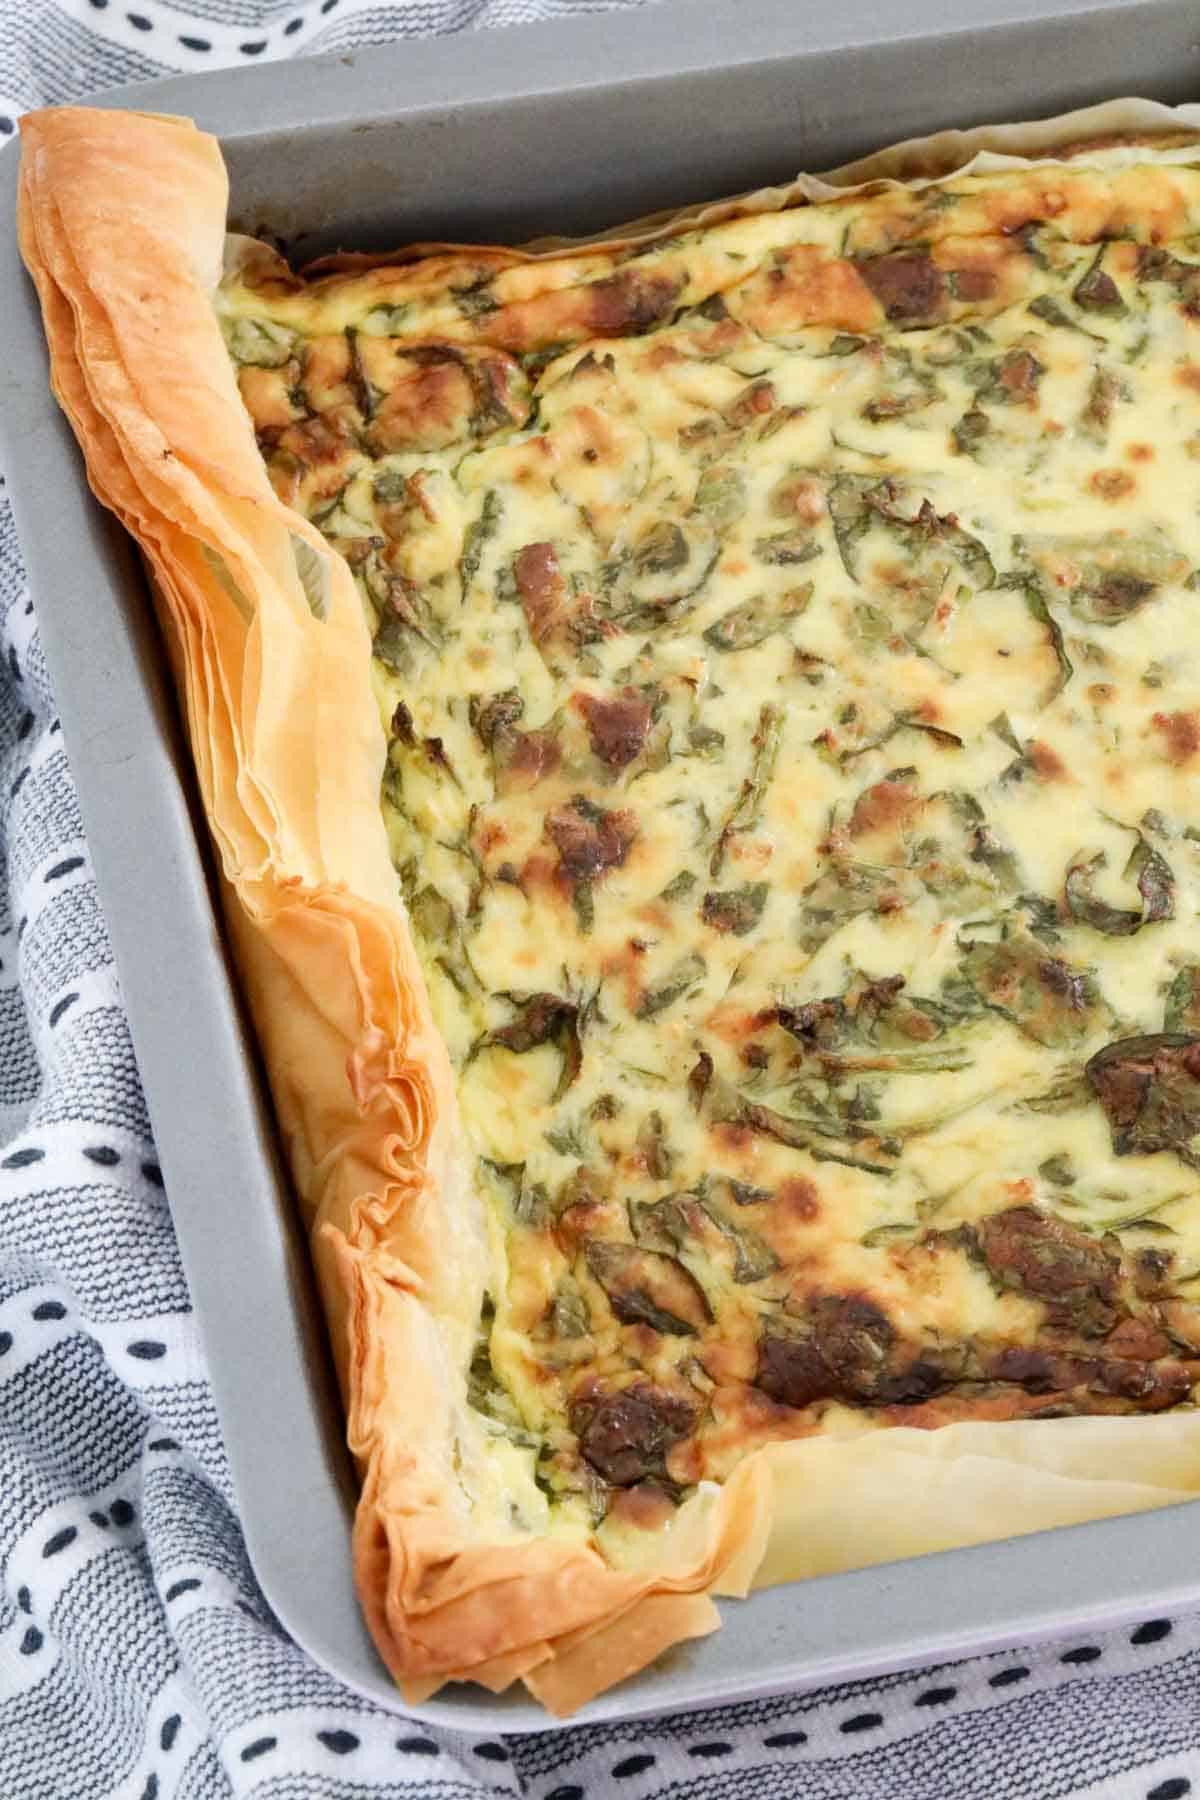 A spinach and cheese filo pie.